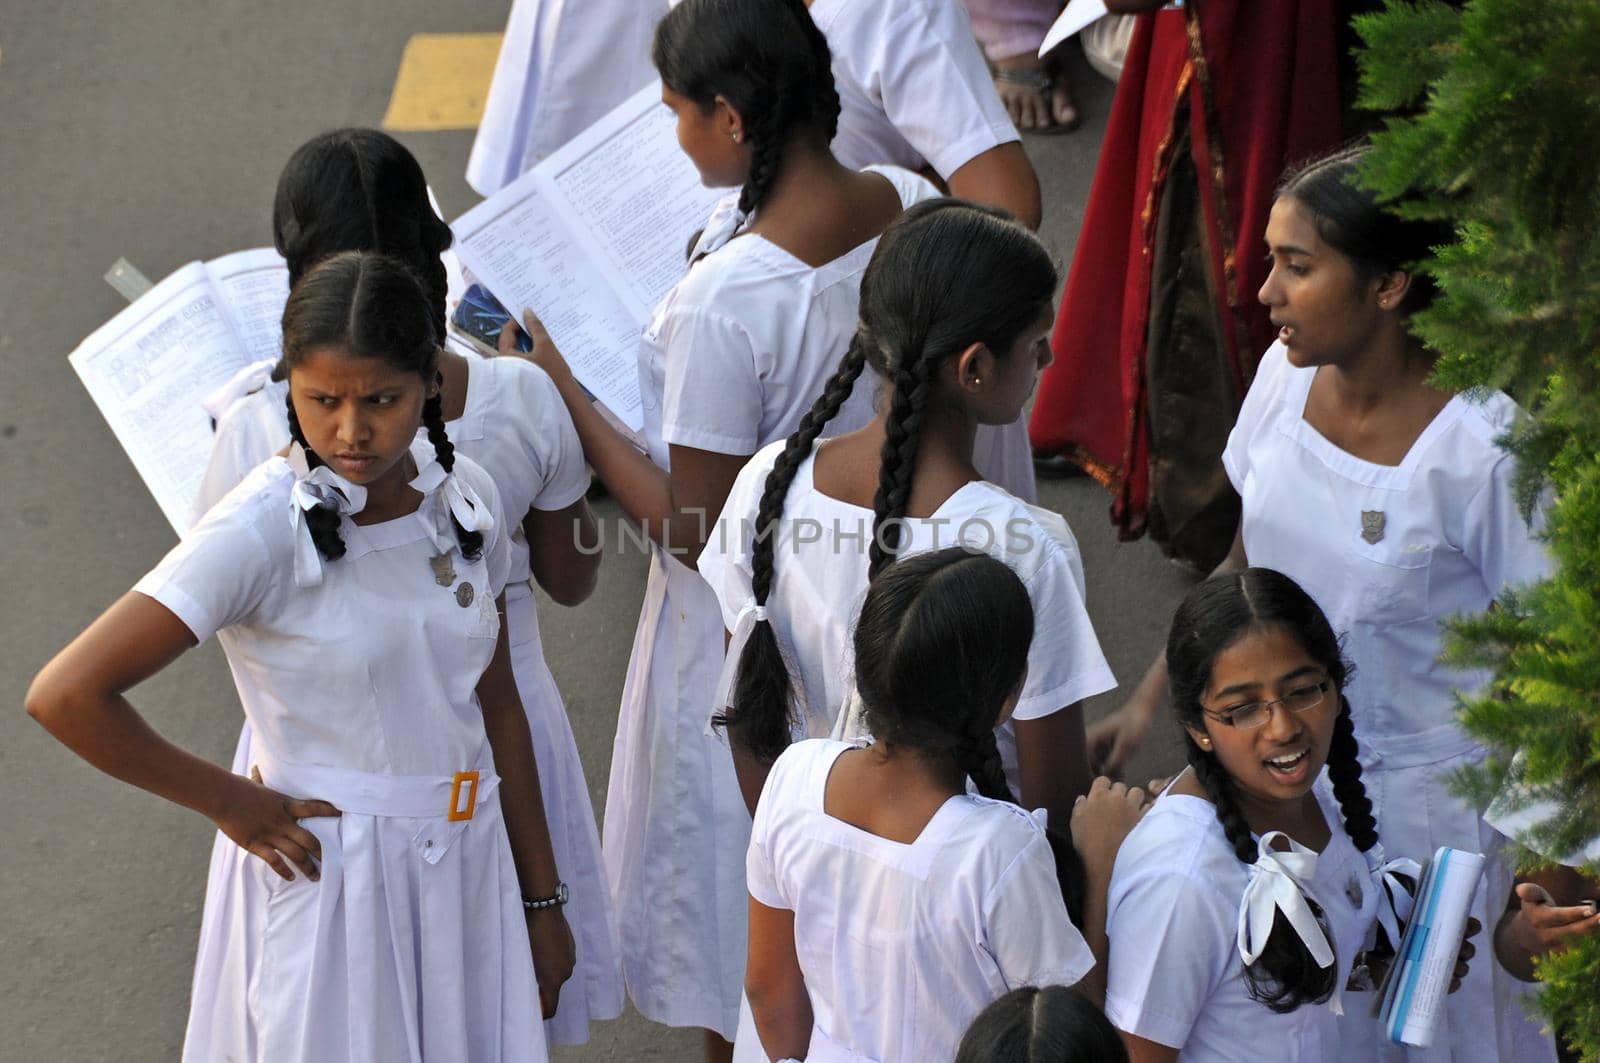 KANDY, SRI LANKA - 14 DECEMBER 2011 Group of young teenage ethnic pupils girls in white school uniform dresses standing outdoors.